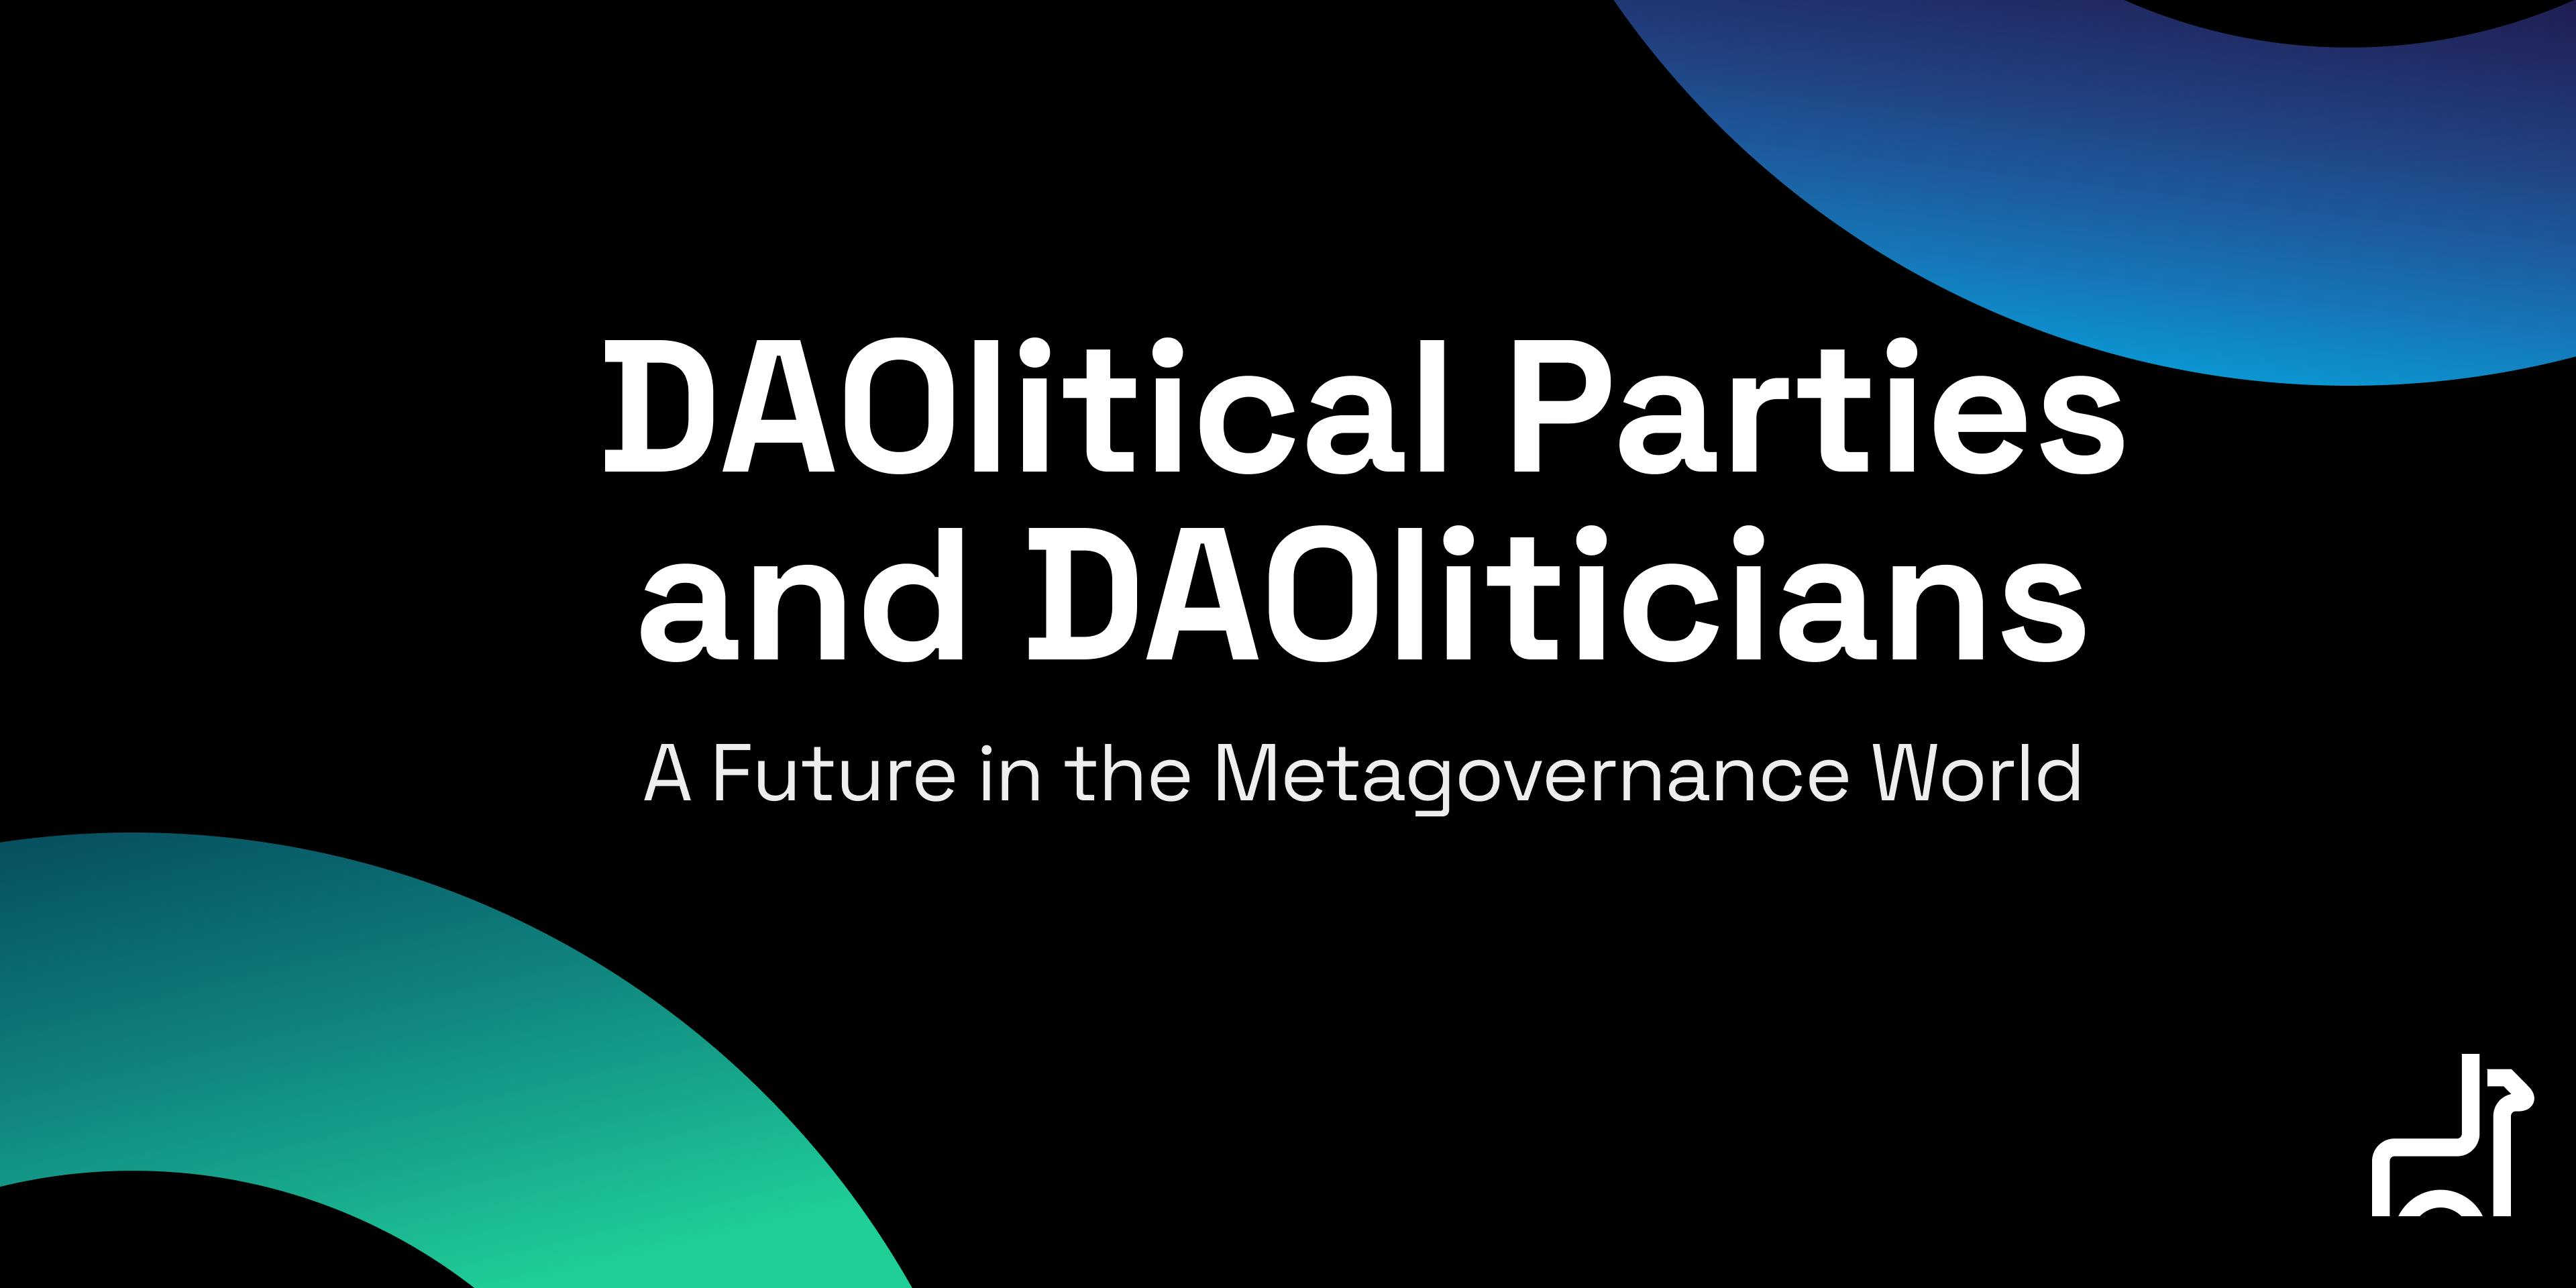 Thumbnail of DAOlitical Parties and DAOliticians: A Future in the Metagovernance World